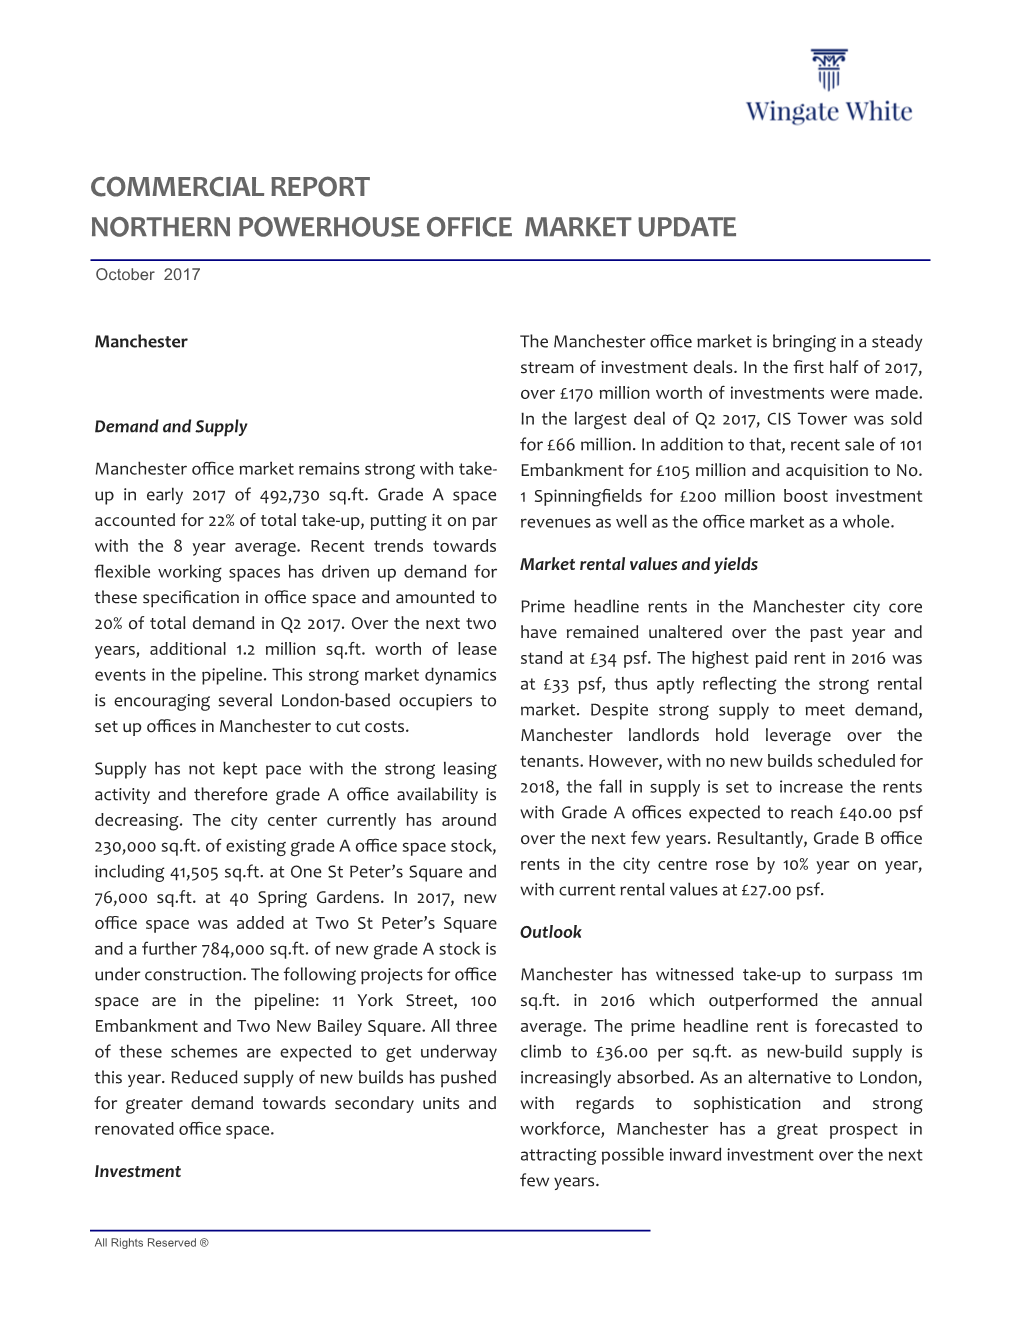 Commercial Report Northern Powerhouse Office Market Update